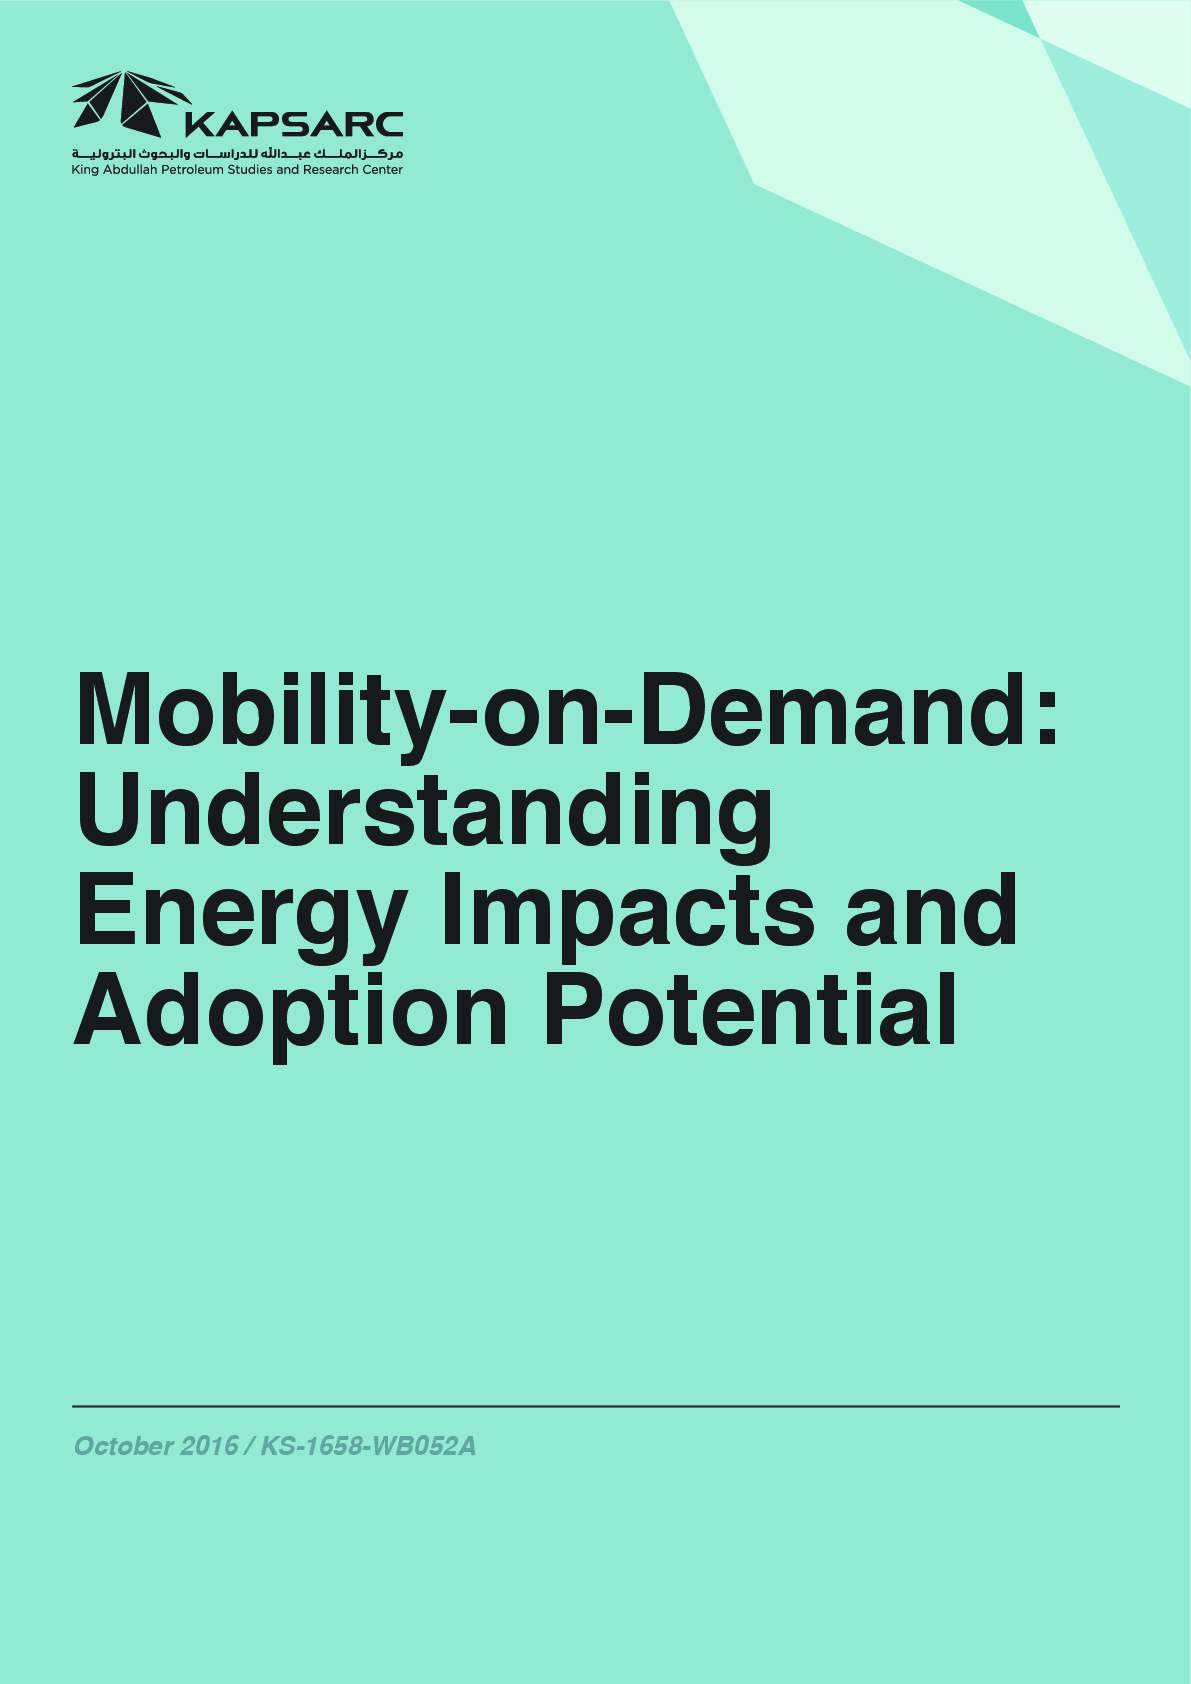 Mobility-on-Demand: Understanding Energy Impacts and Adoption Potential